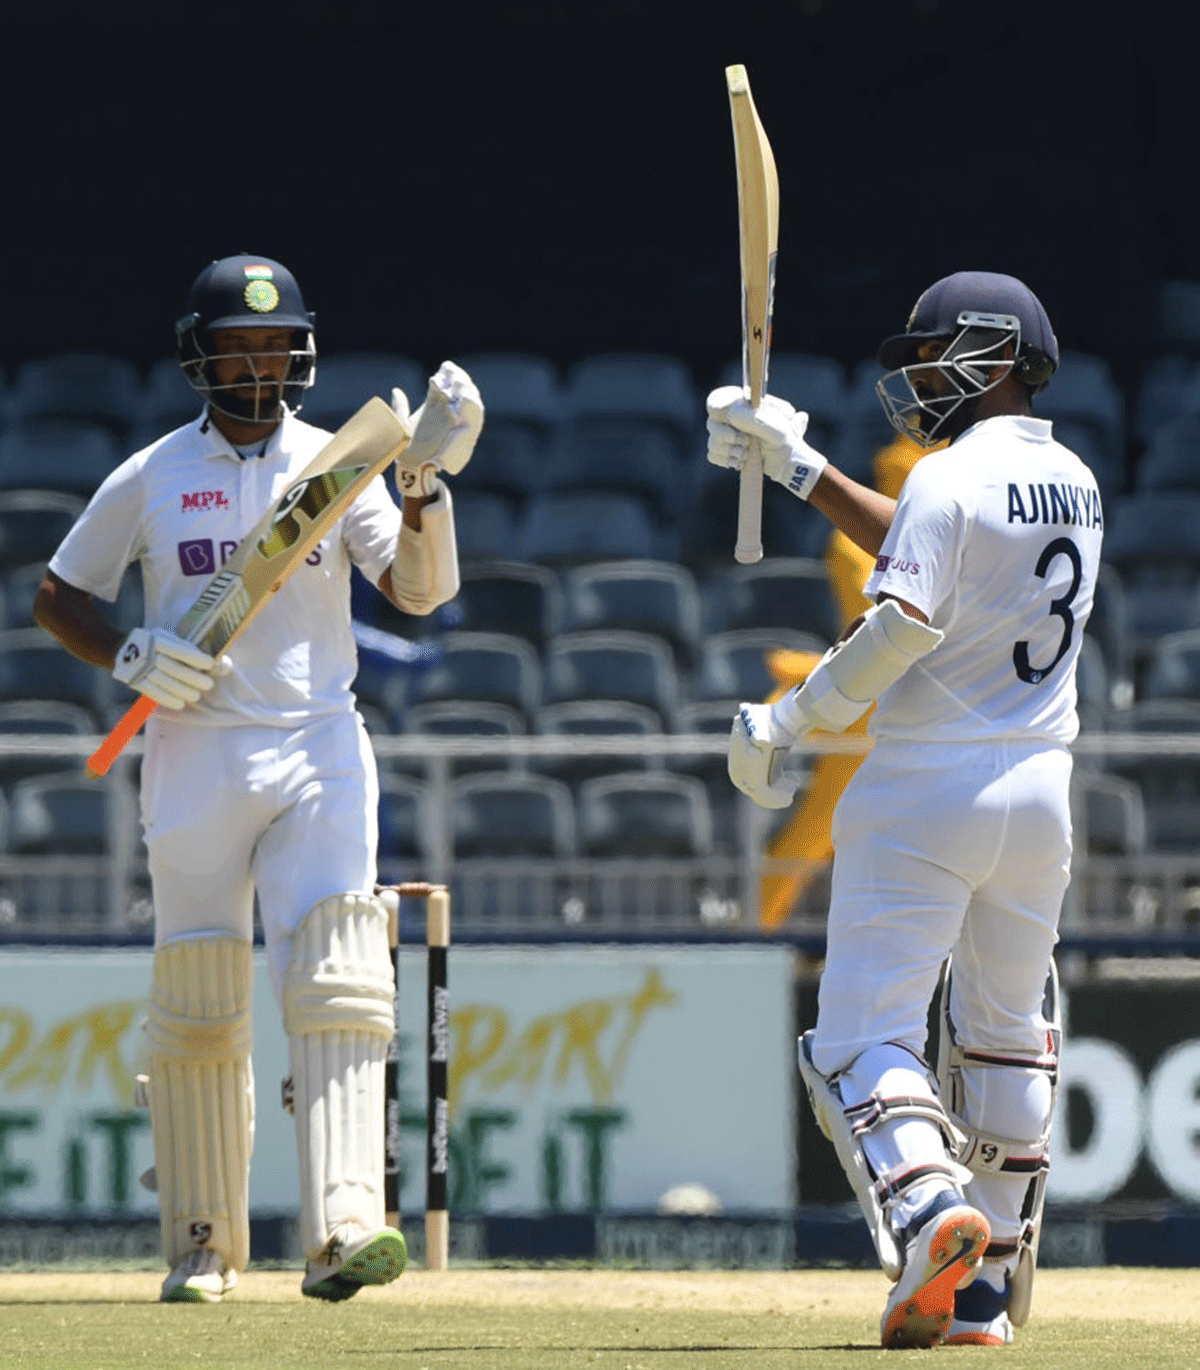 Both Cheteshwar Pujara (53) and Ajinkya Rahane (58) struck half-centuries in the 2nd innings of the Wanderers Test but did not go on to score big to help add to India's total